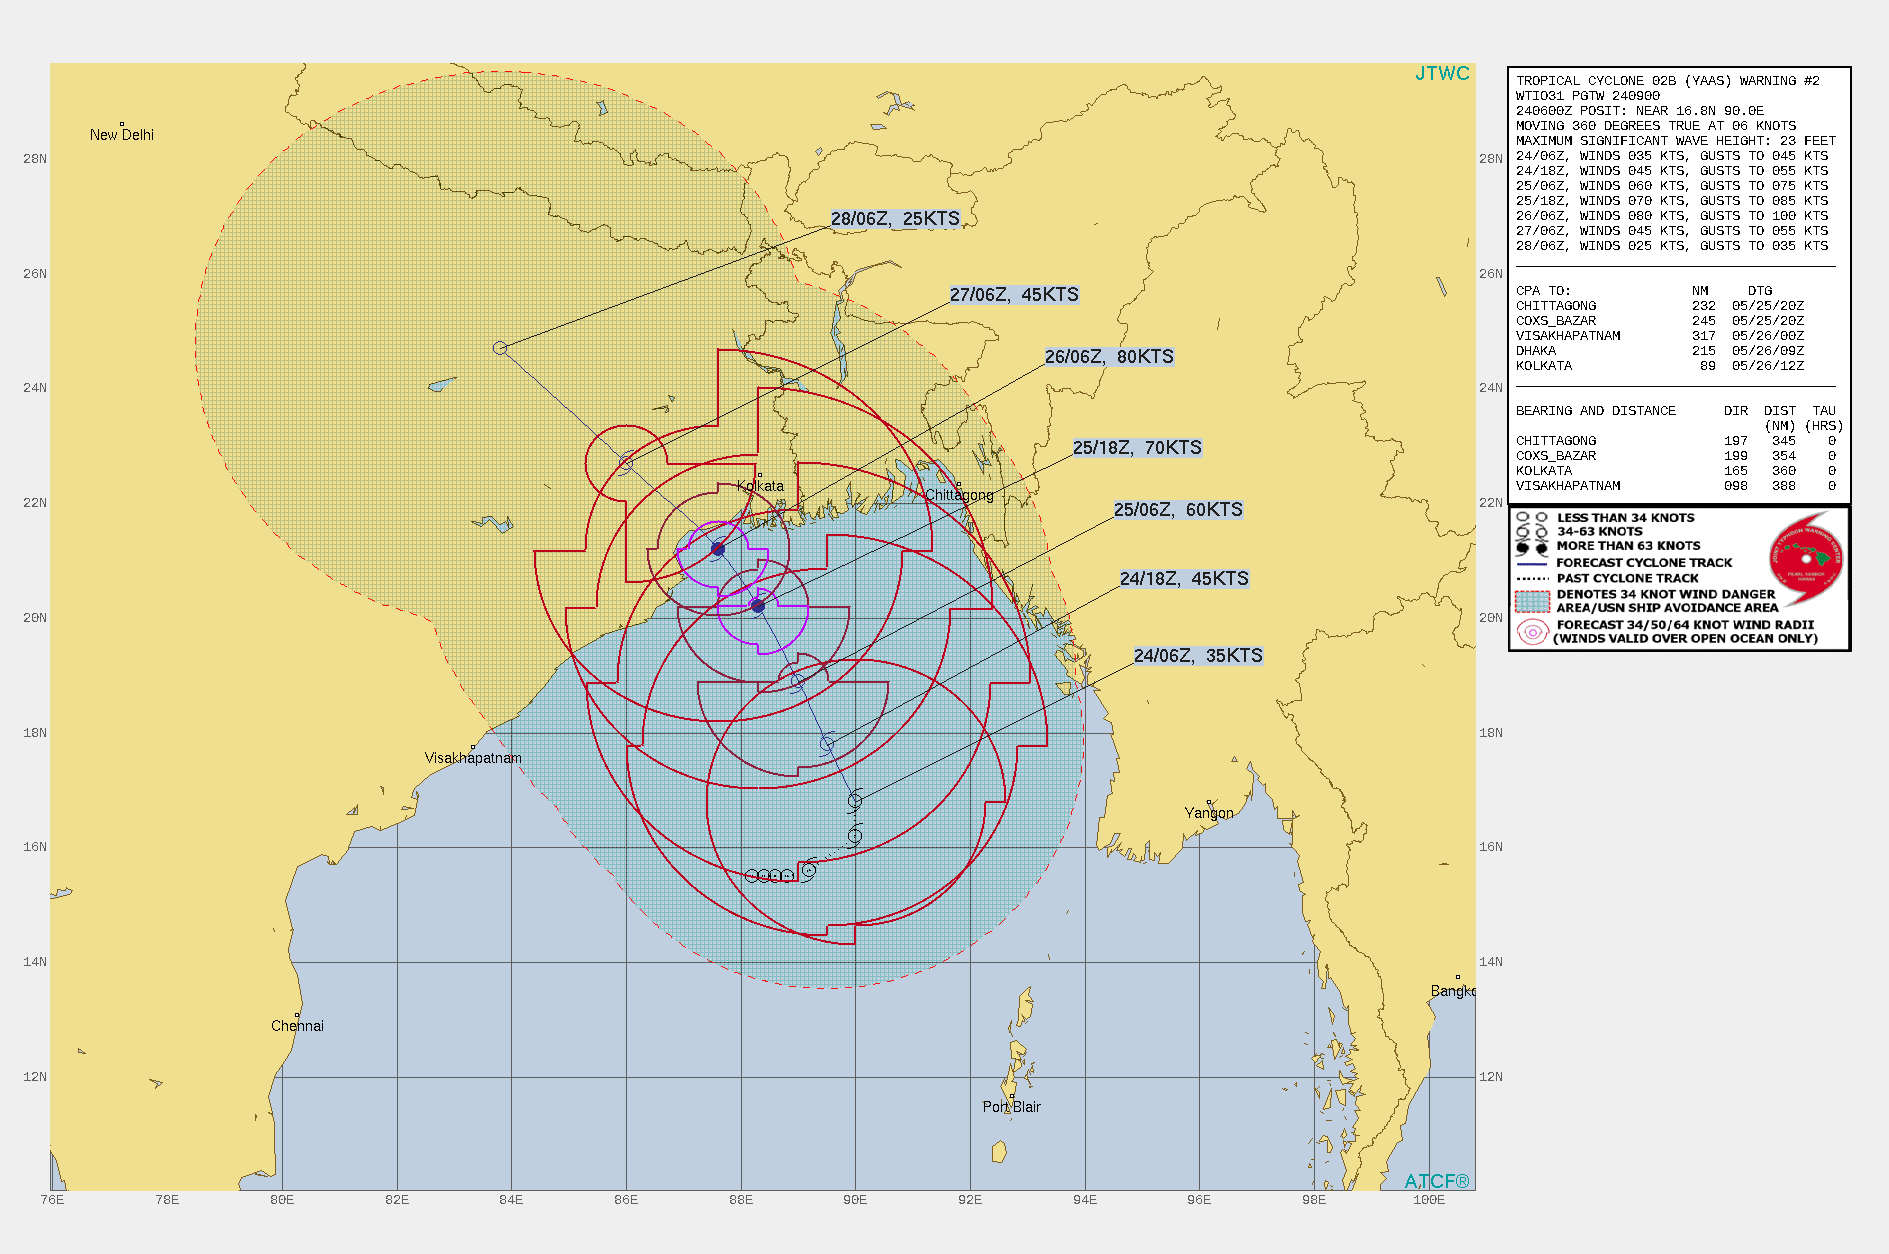 TC 02B(YAAS).WARNING 2 ISSUED AT 24/09UTC. TC 02B IS CURRENTLY IN A MARGINALLY FAVORABLE ENVIRONMENT WITH MODERATE  VERTICAL WIND SHEAR (15-25 KTS) OFFSET BY ROBUST EQUATORWARD OUTFLOW  ALOFT AND WARM (30-31C) SEA SURFACE TEMPERATURES. THE SYSTEM WILL  REMAIN IN A MARGINAL ENVIRONMENT FOR THE NEXT 24 HOURS AS IT TRACKS  NORTH-NORTHWESTWARD AROUND A SUBTROPICAL RIDGE TO THE NORTHEAST.  AFTER 24H, THE VERTICAL WIND SHEAR IS FORECAST TO DECREASE,  ALLOWING TC 02B TO REACH A PEAK INTENSITY OF 80 KNOTS/US CAT 1 AT 48H JUST  BEFORE MAKING LANDFALL SOUTHWEST OF KOLKATA. AFTER LANDFALL, THE  SYSTEM WILL RAPIDLY WEAKEN WITH DISSIPATION BY 96H.